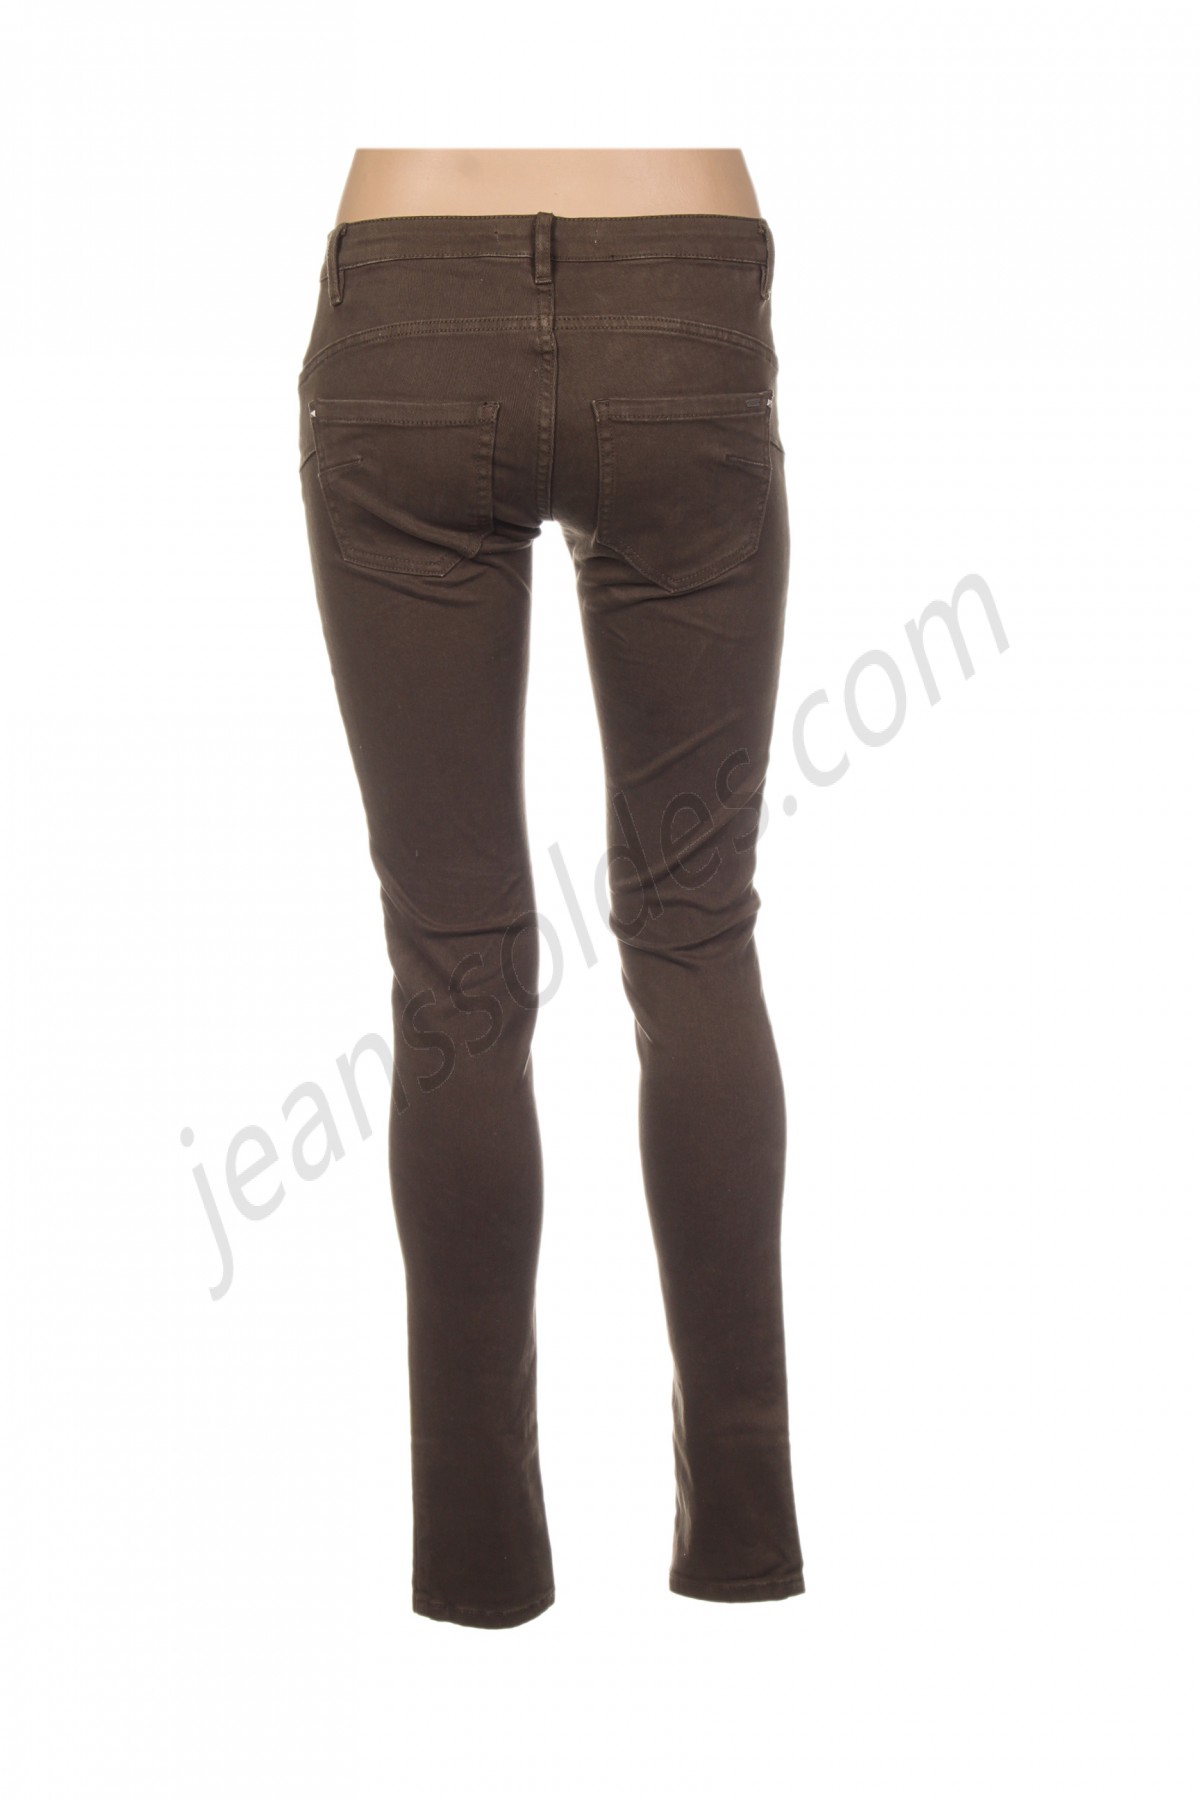 i.code (by ikks)-Jeans coupe slim prix d’amis - -1